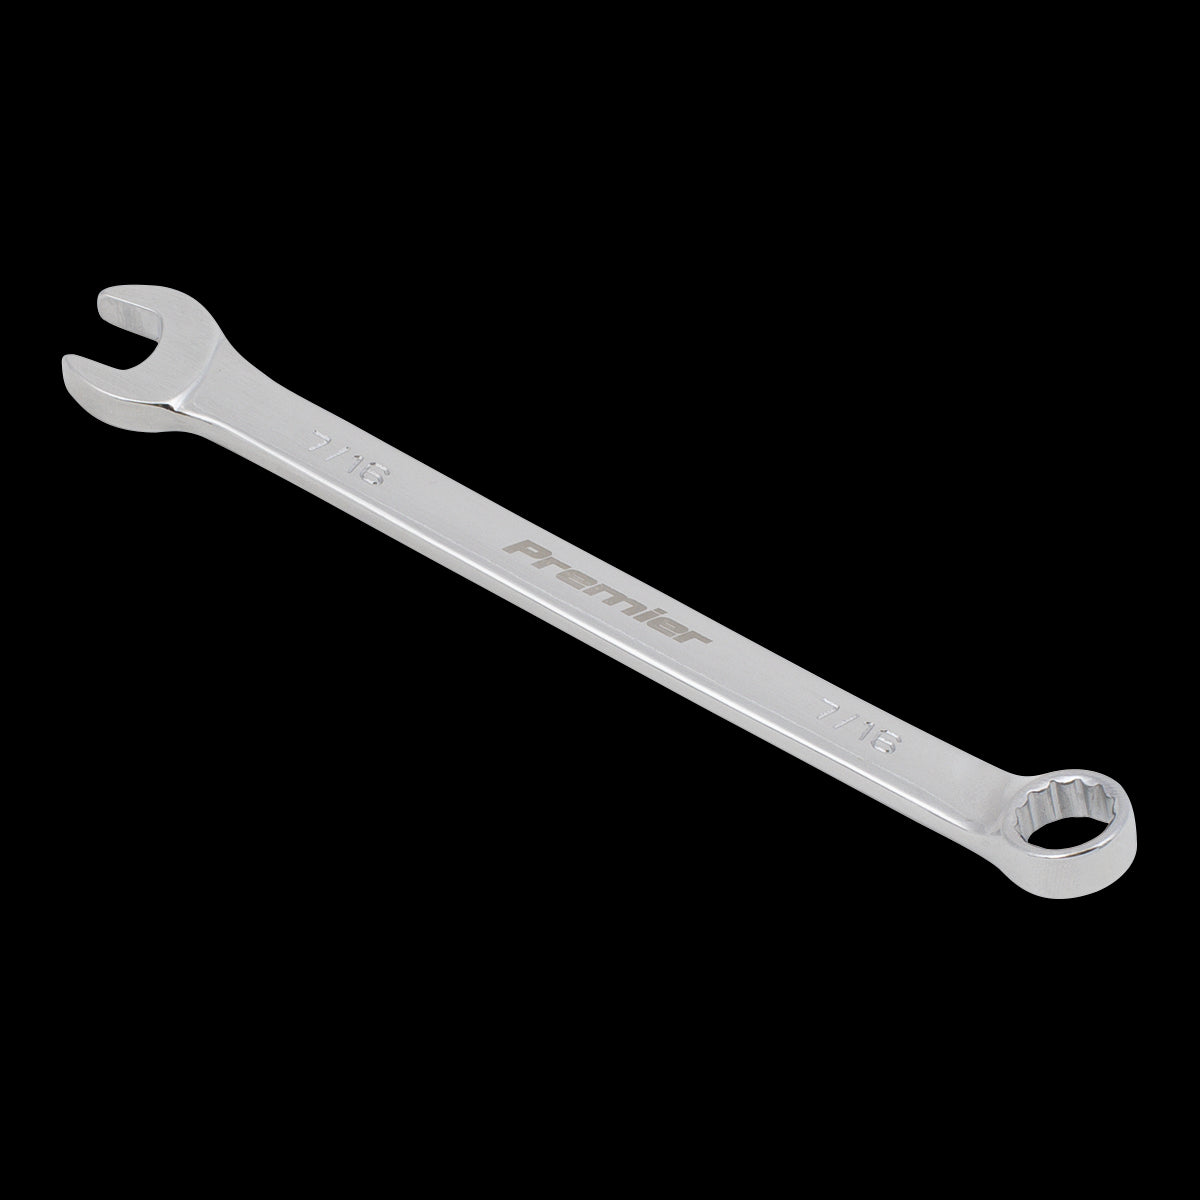 Sealey Premier Combination Spanner 7/16" - Imperial